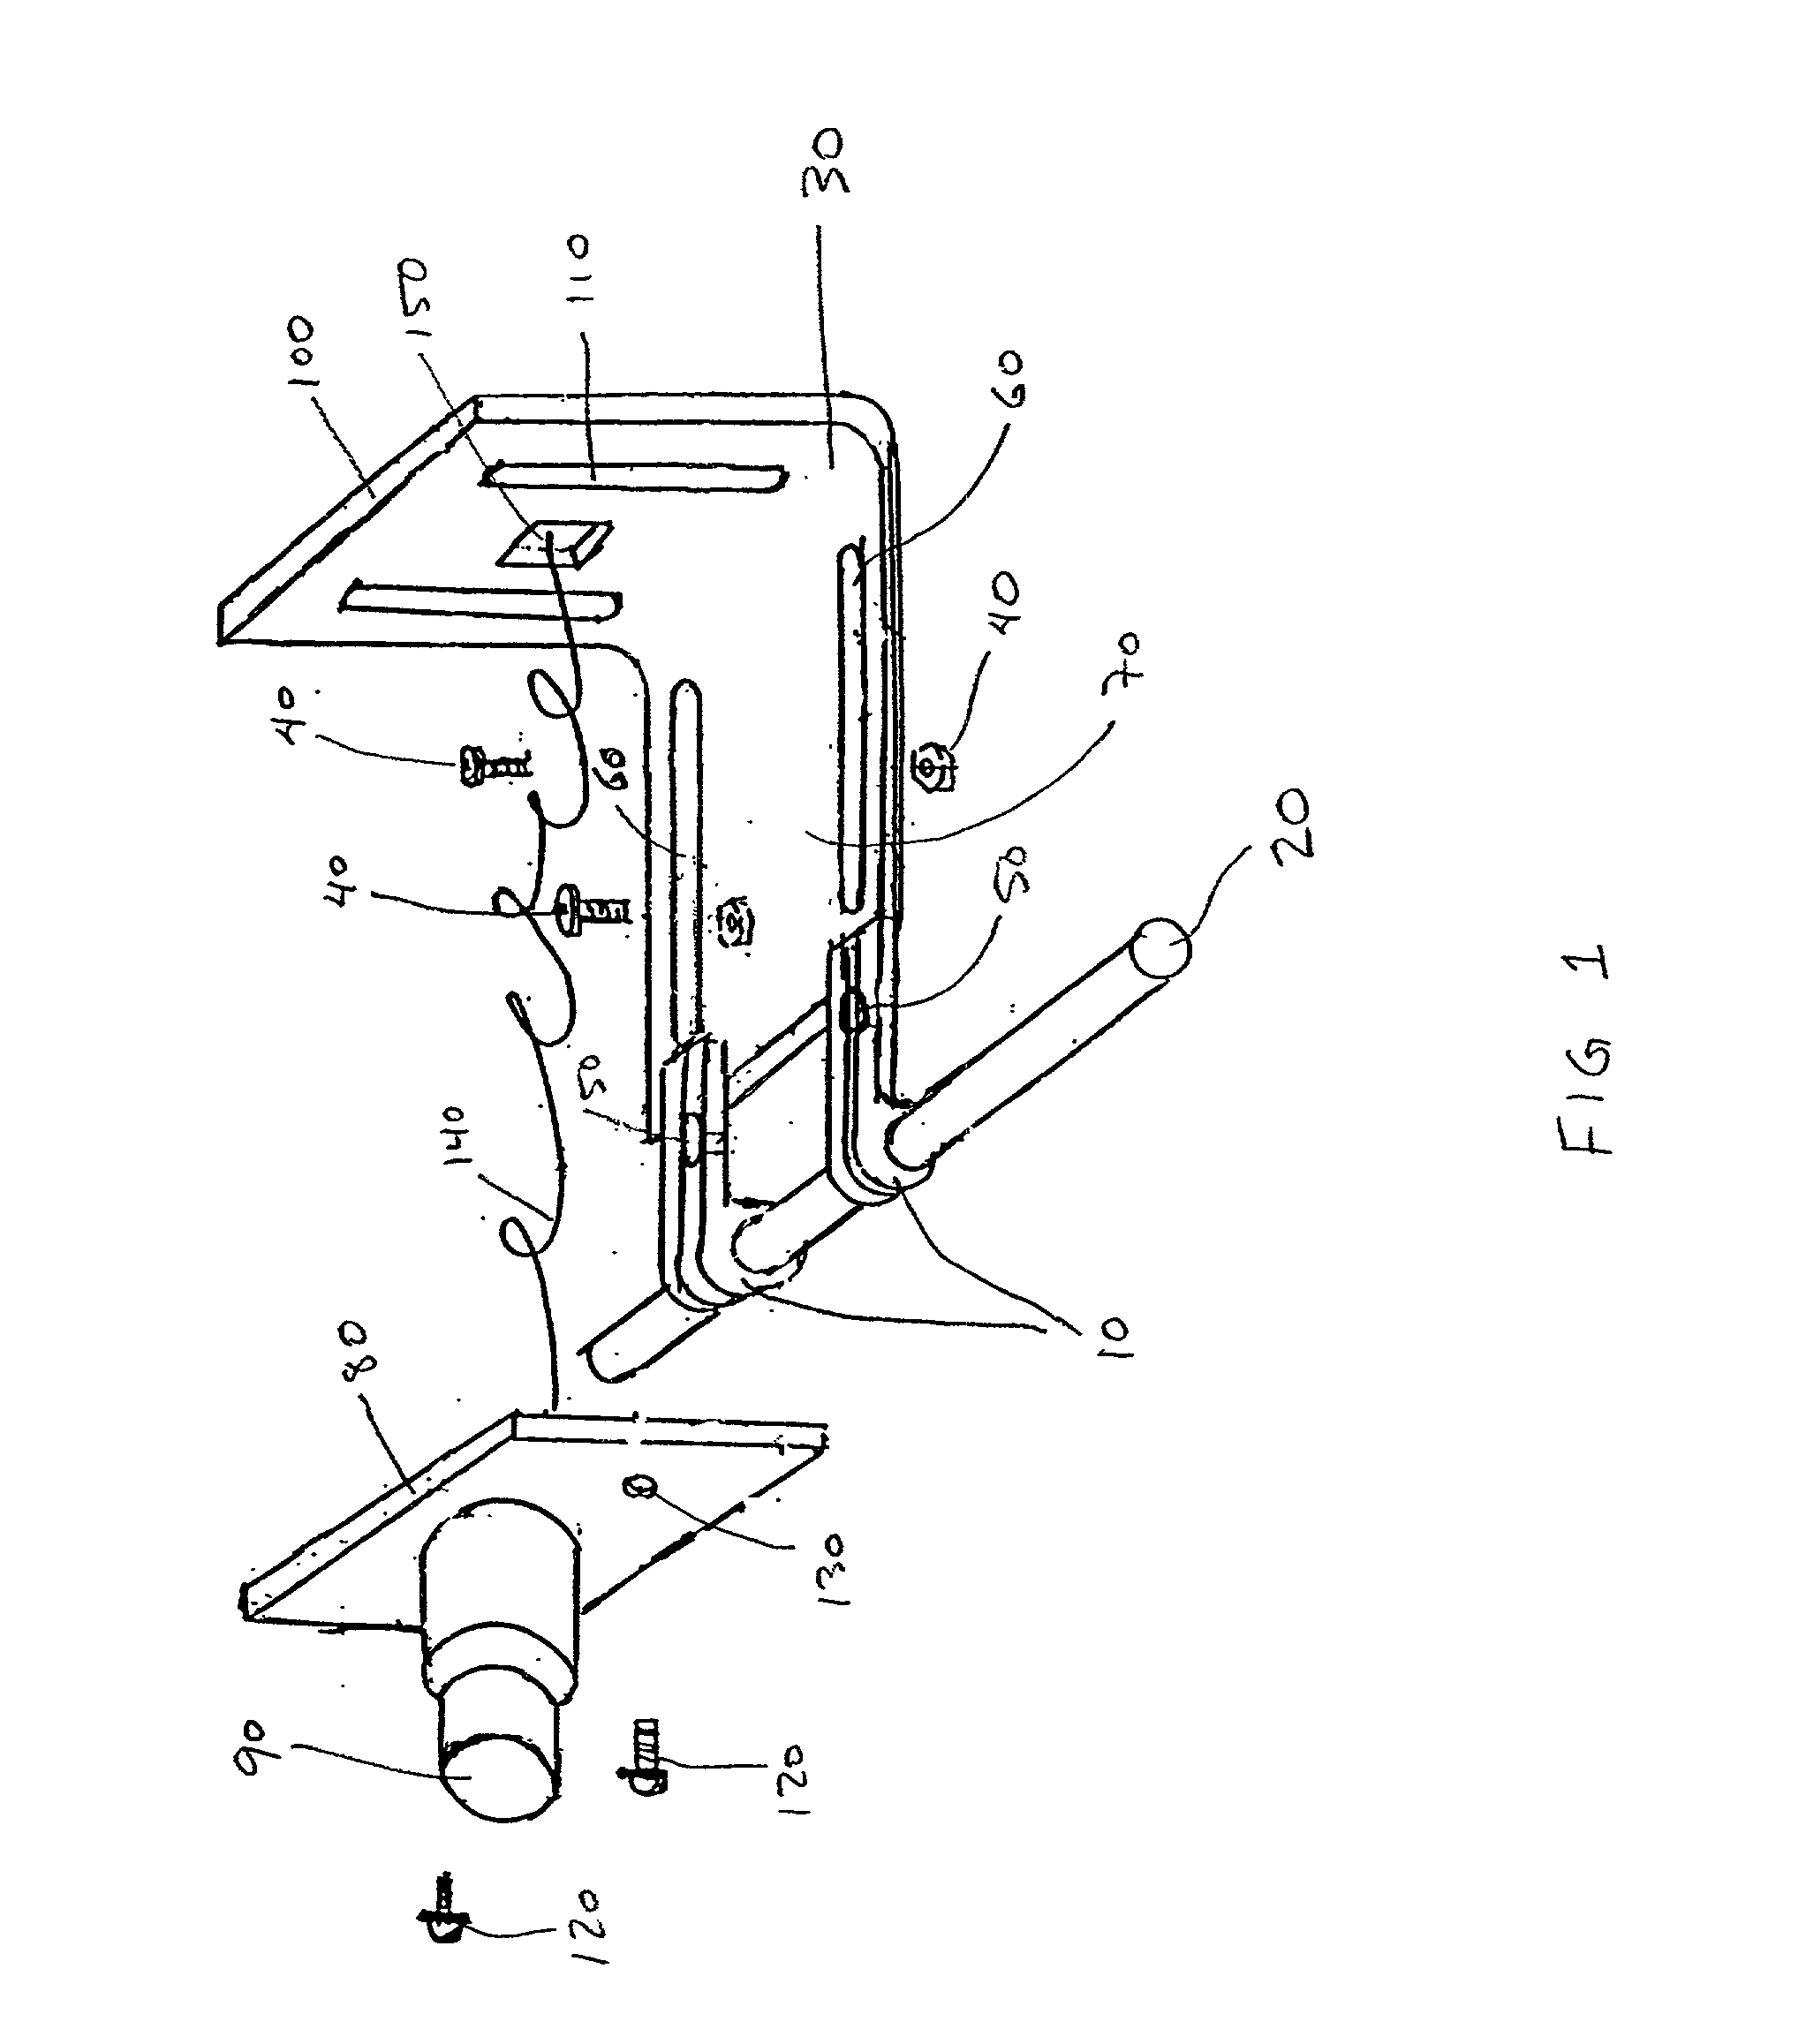 Transducer mounting assembly